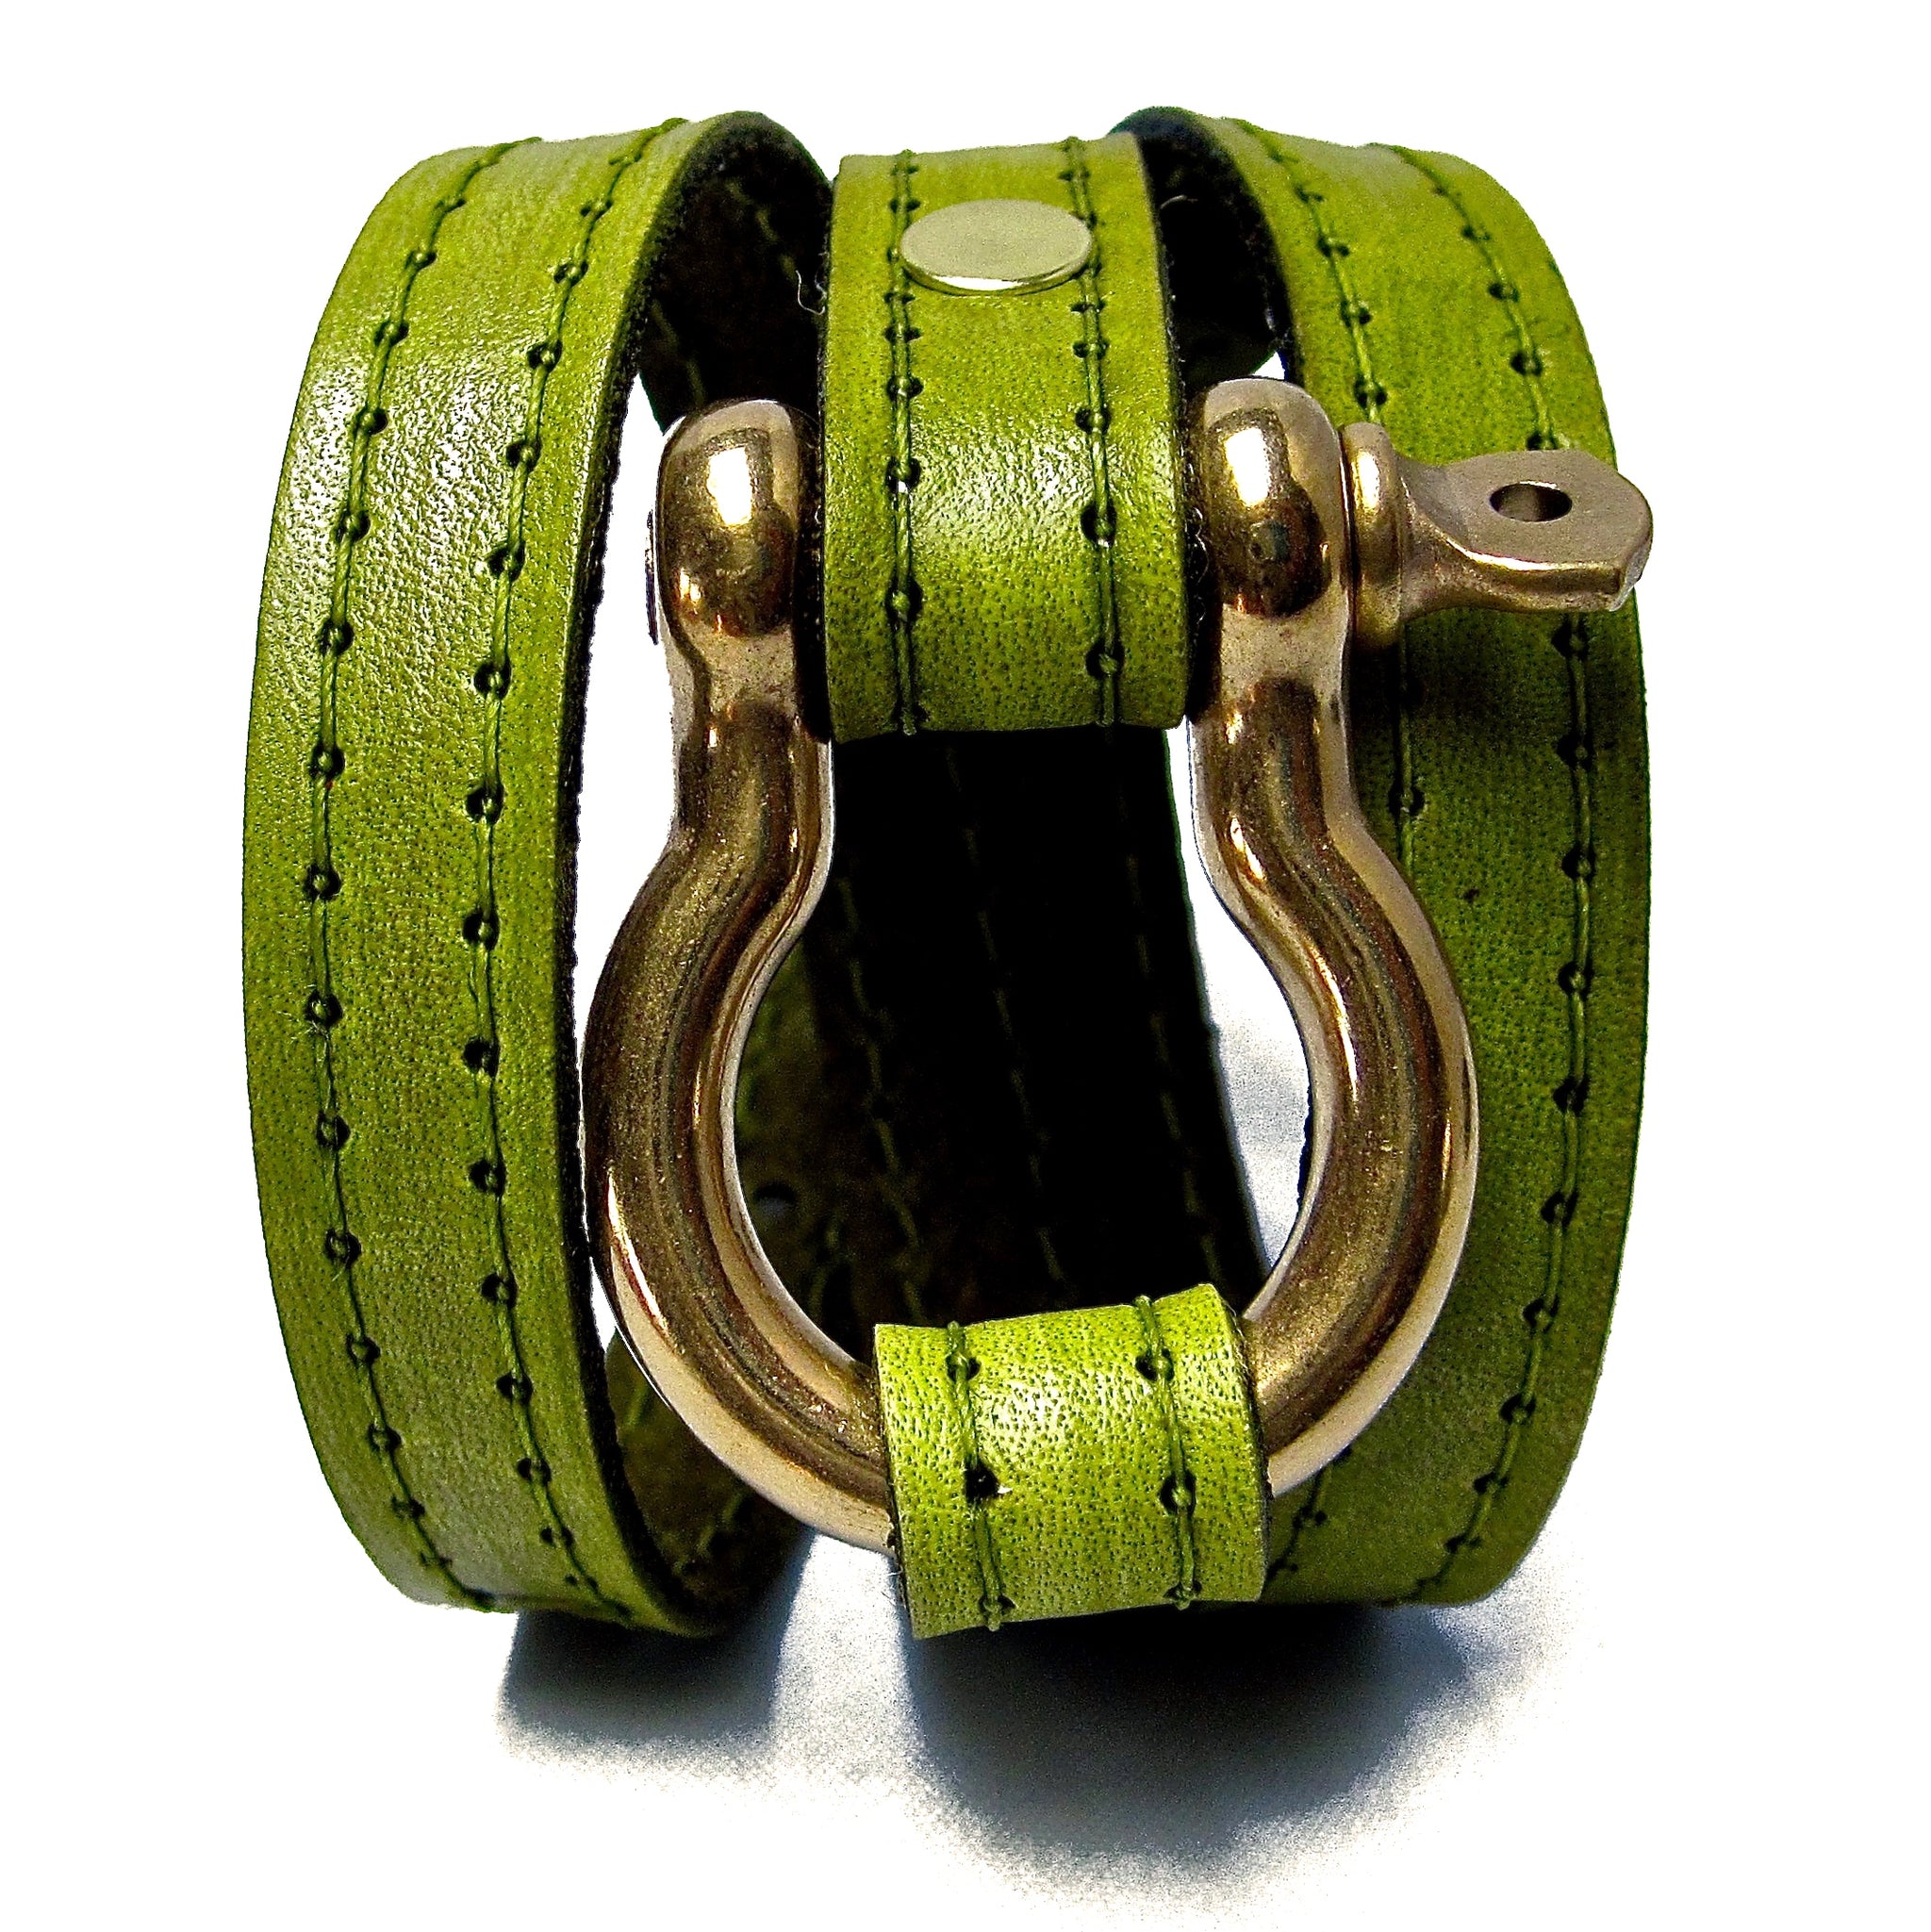 Nyet jewelry gold signature wraparound leather bracelet chartreuse BY NYET JEWELRY